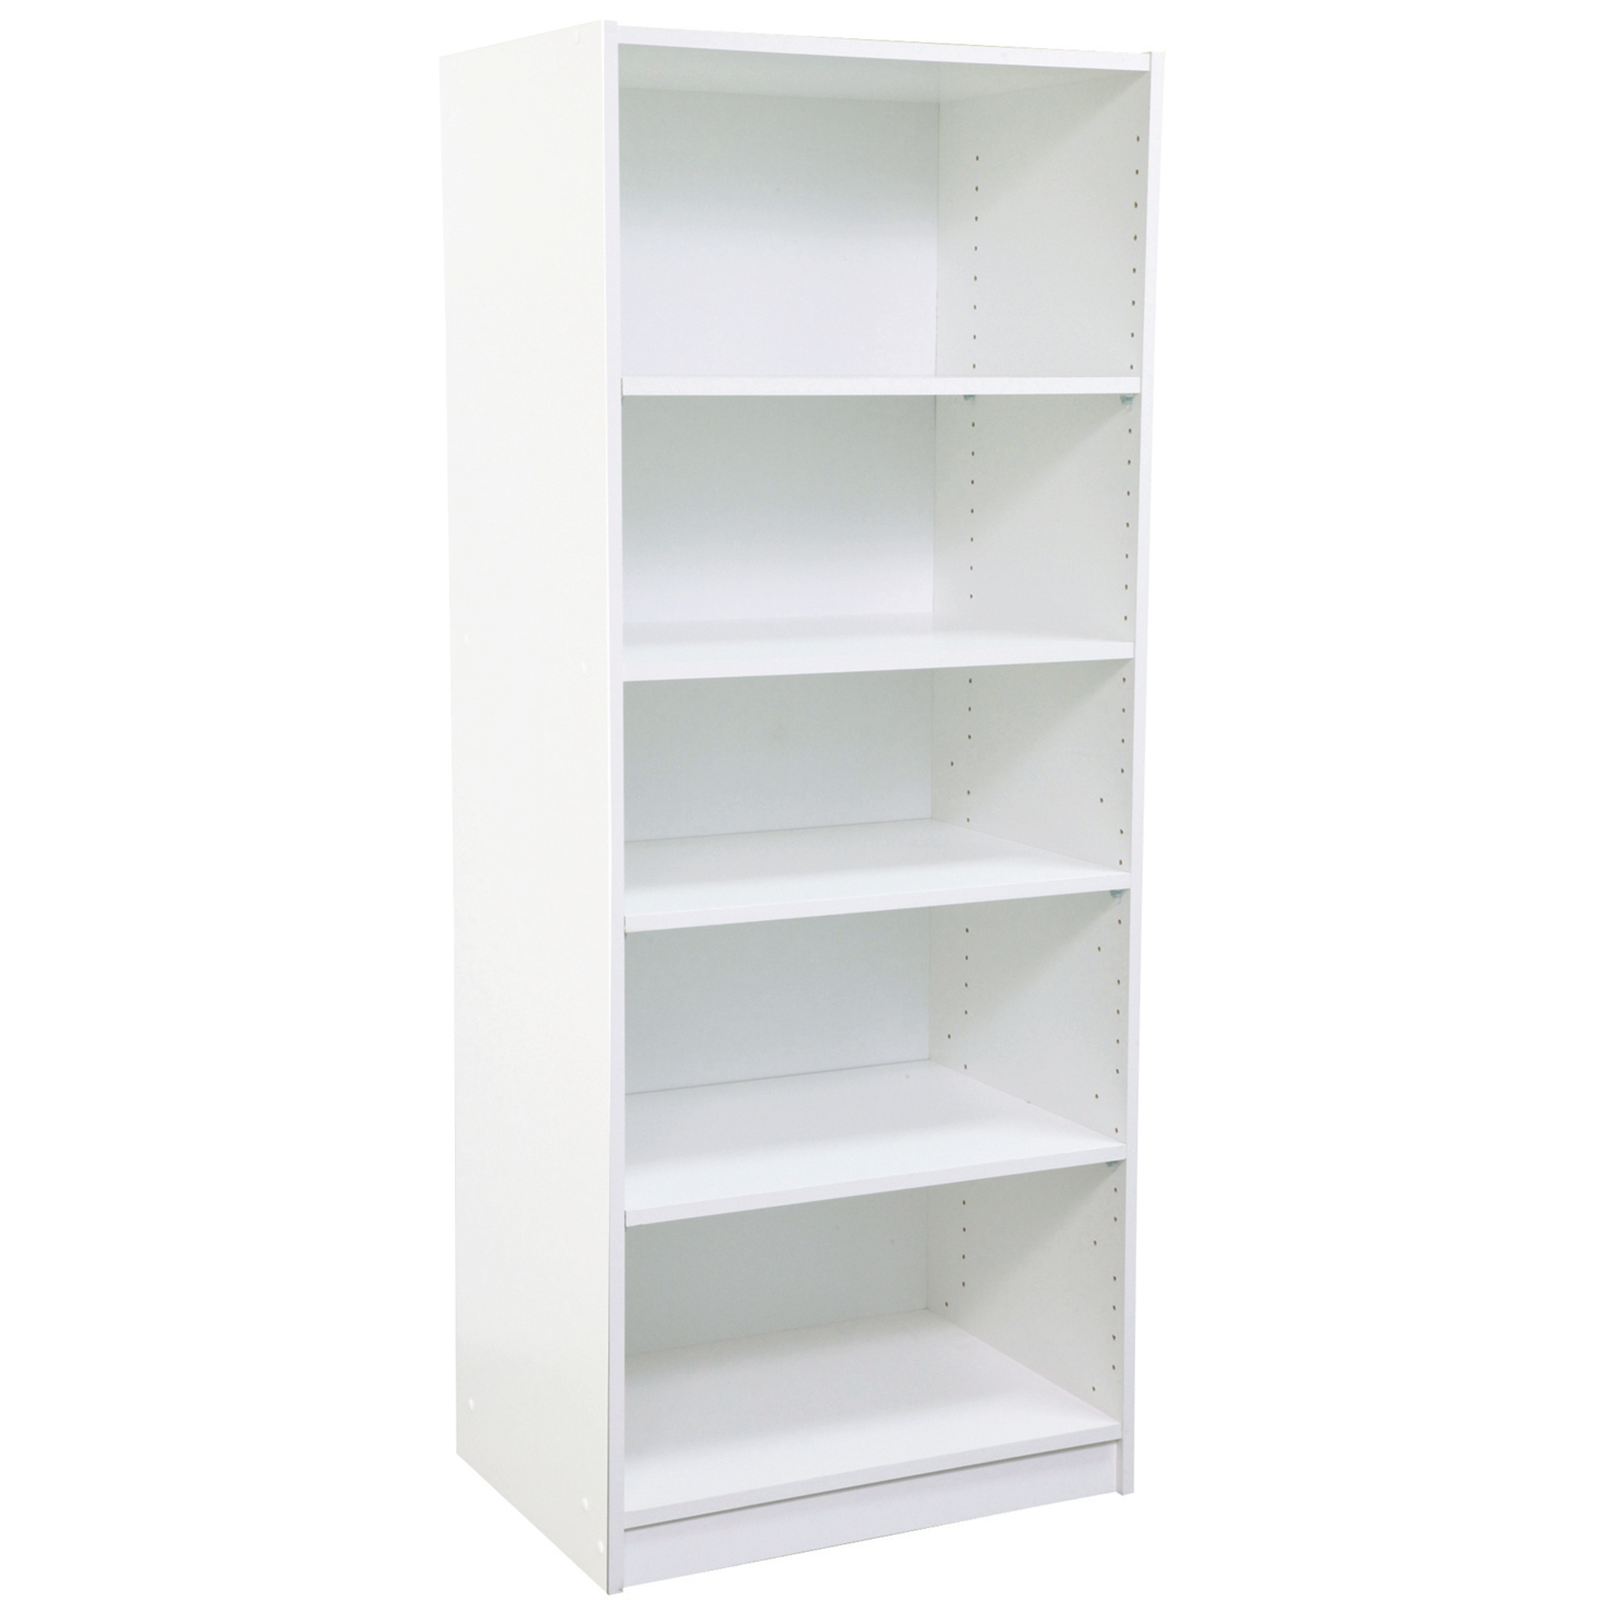 Multistore 1495 x 608 x 430mm Wardrobe Insert With 1 Fixed Shelf and 3 Adjustable Shelves